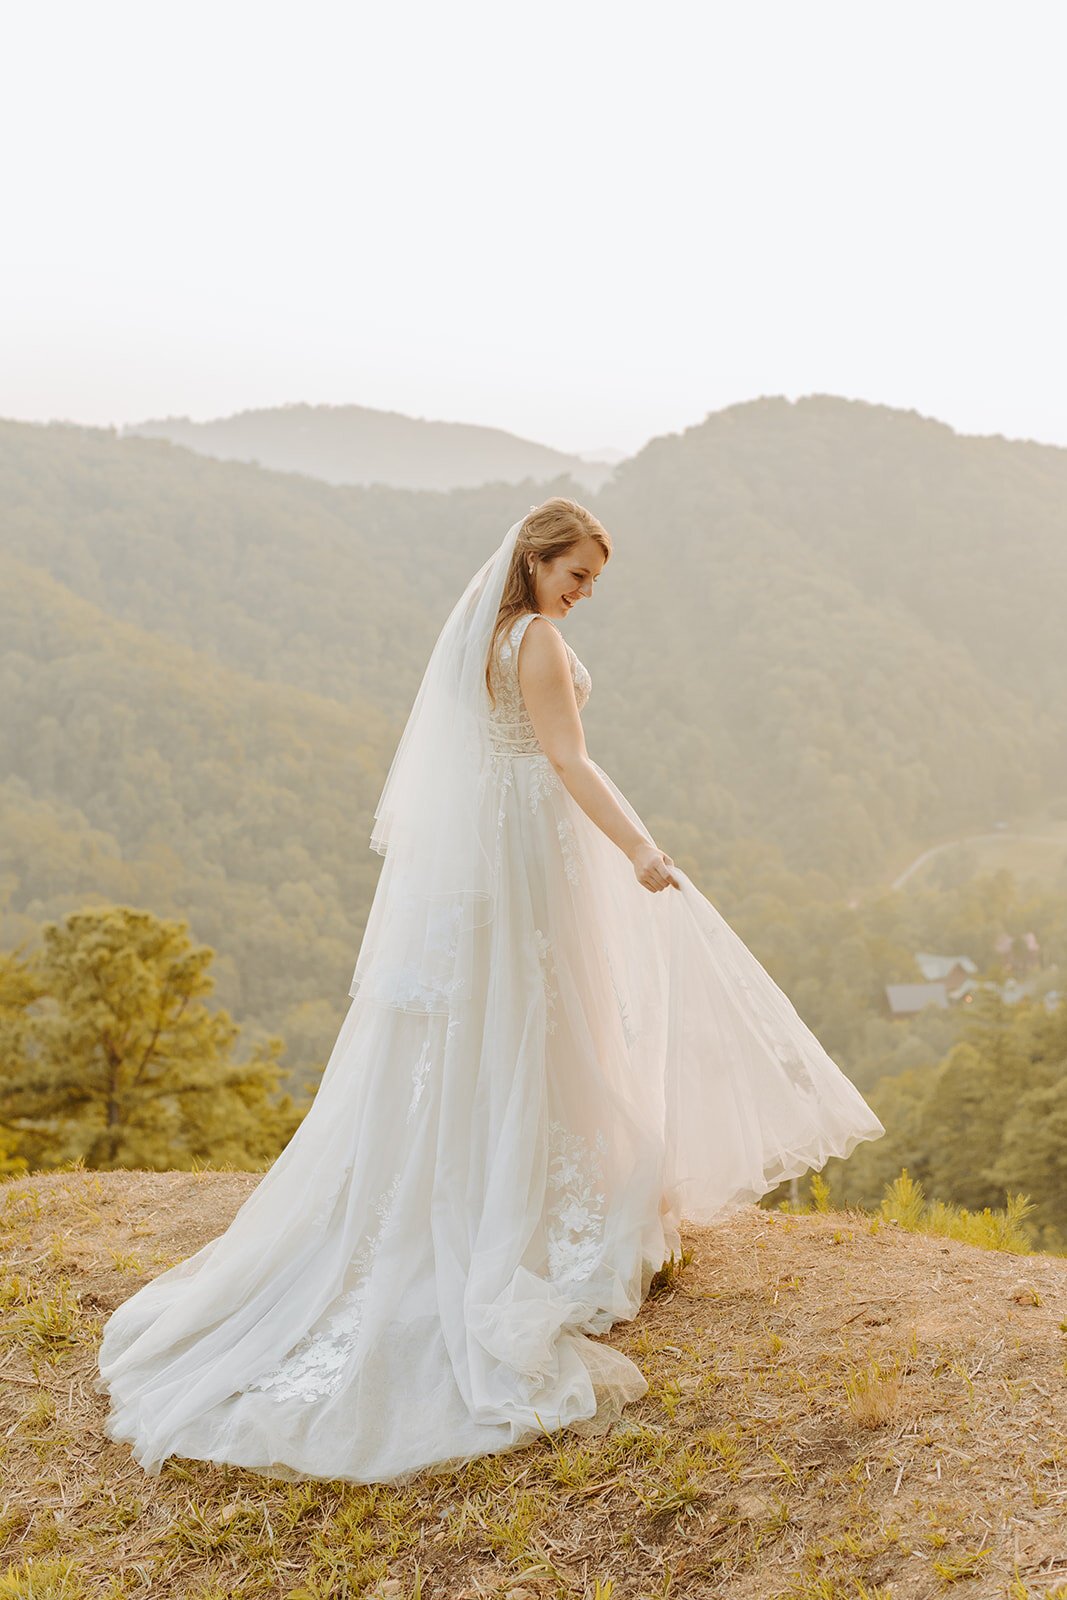 ivory-and-beau-bride-kelly-down-for-the-gown-real-bride-maggie-sottero-wedding-dress-bridal-gown-wedding-gown-Tennessee Knoxville Pigeon Forge Smokey Mountains the Magnolia Wedding Traveling Wedding Photographer Maria Angelica Photography-53.jpg